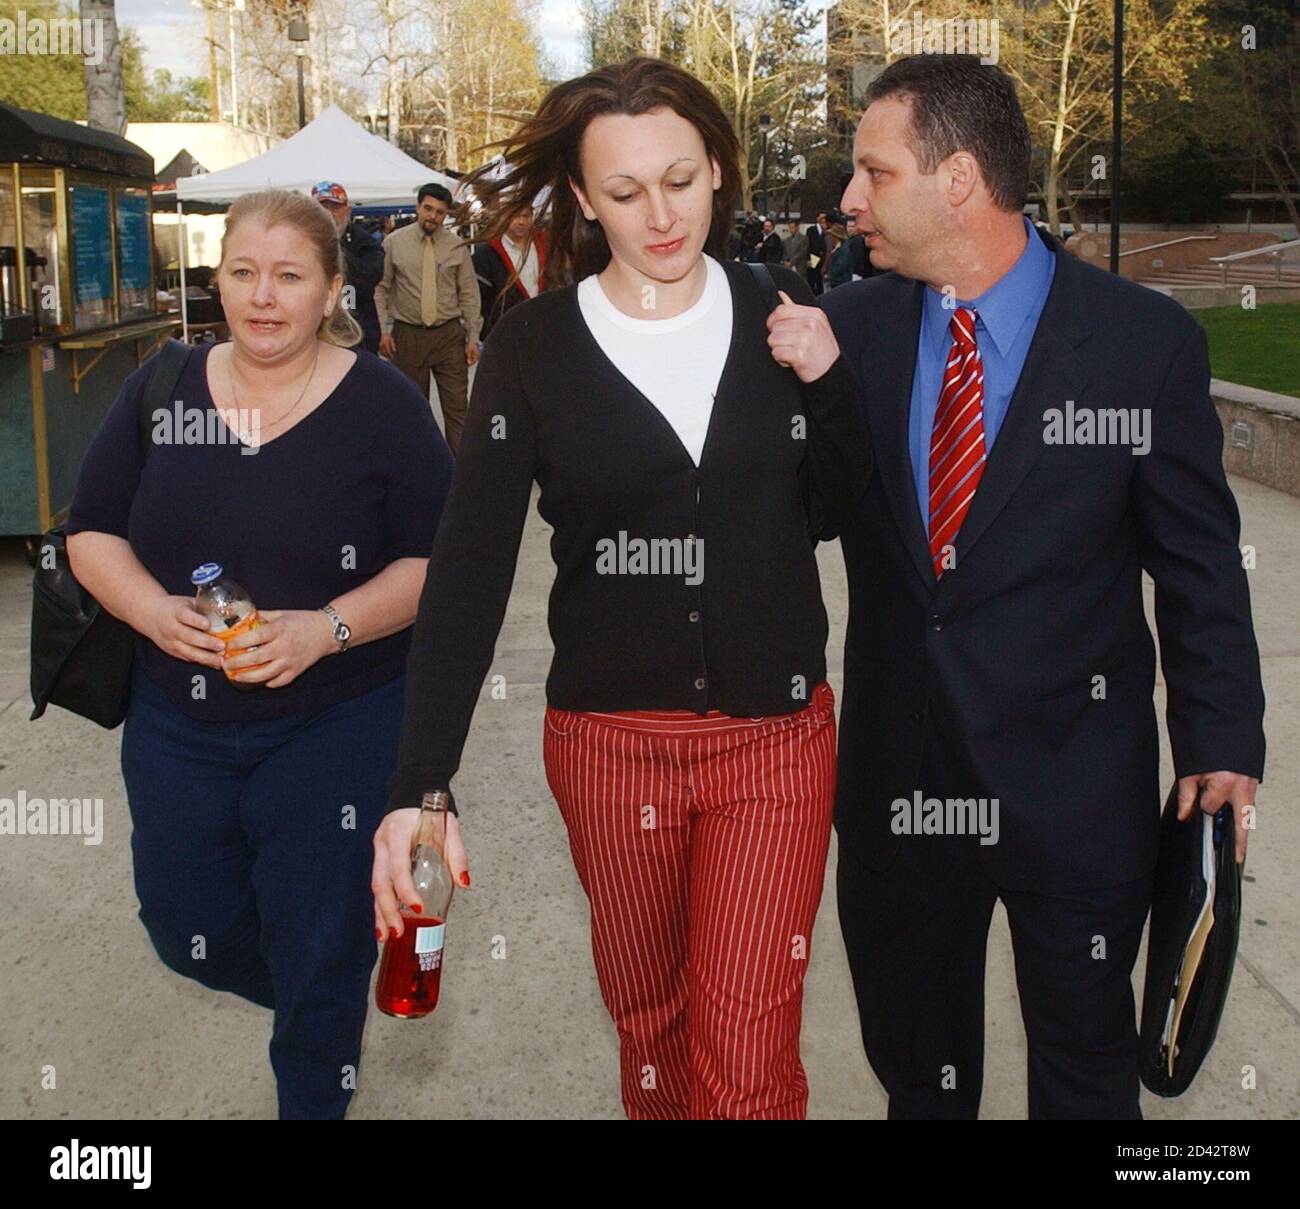 Marjorie Bakley (L) and Holly Bakley, sister and daughter respectively of Bonny  Lee Bakley depart the courthouse with their attorney in Van Nuys,  California February 26, 2003, after the first day of